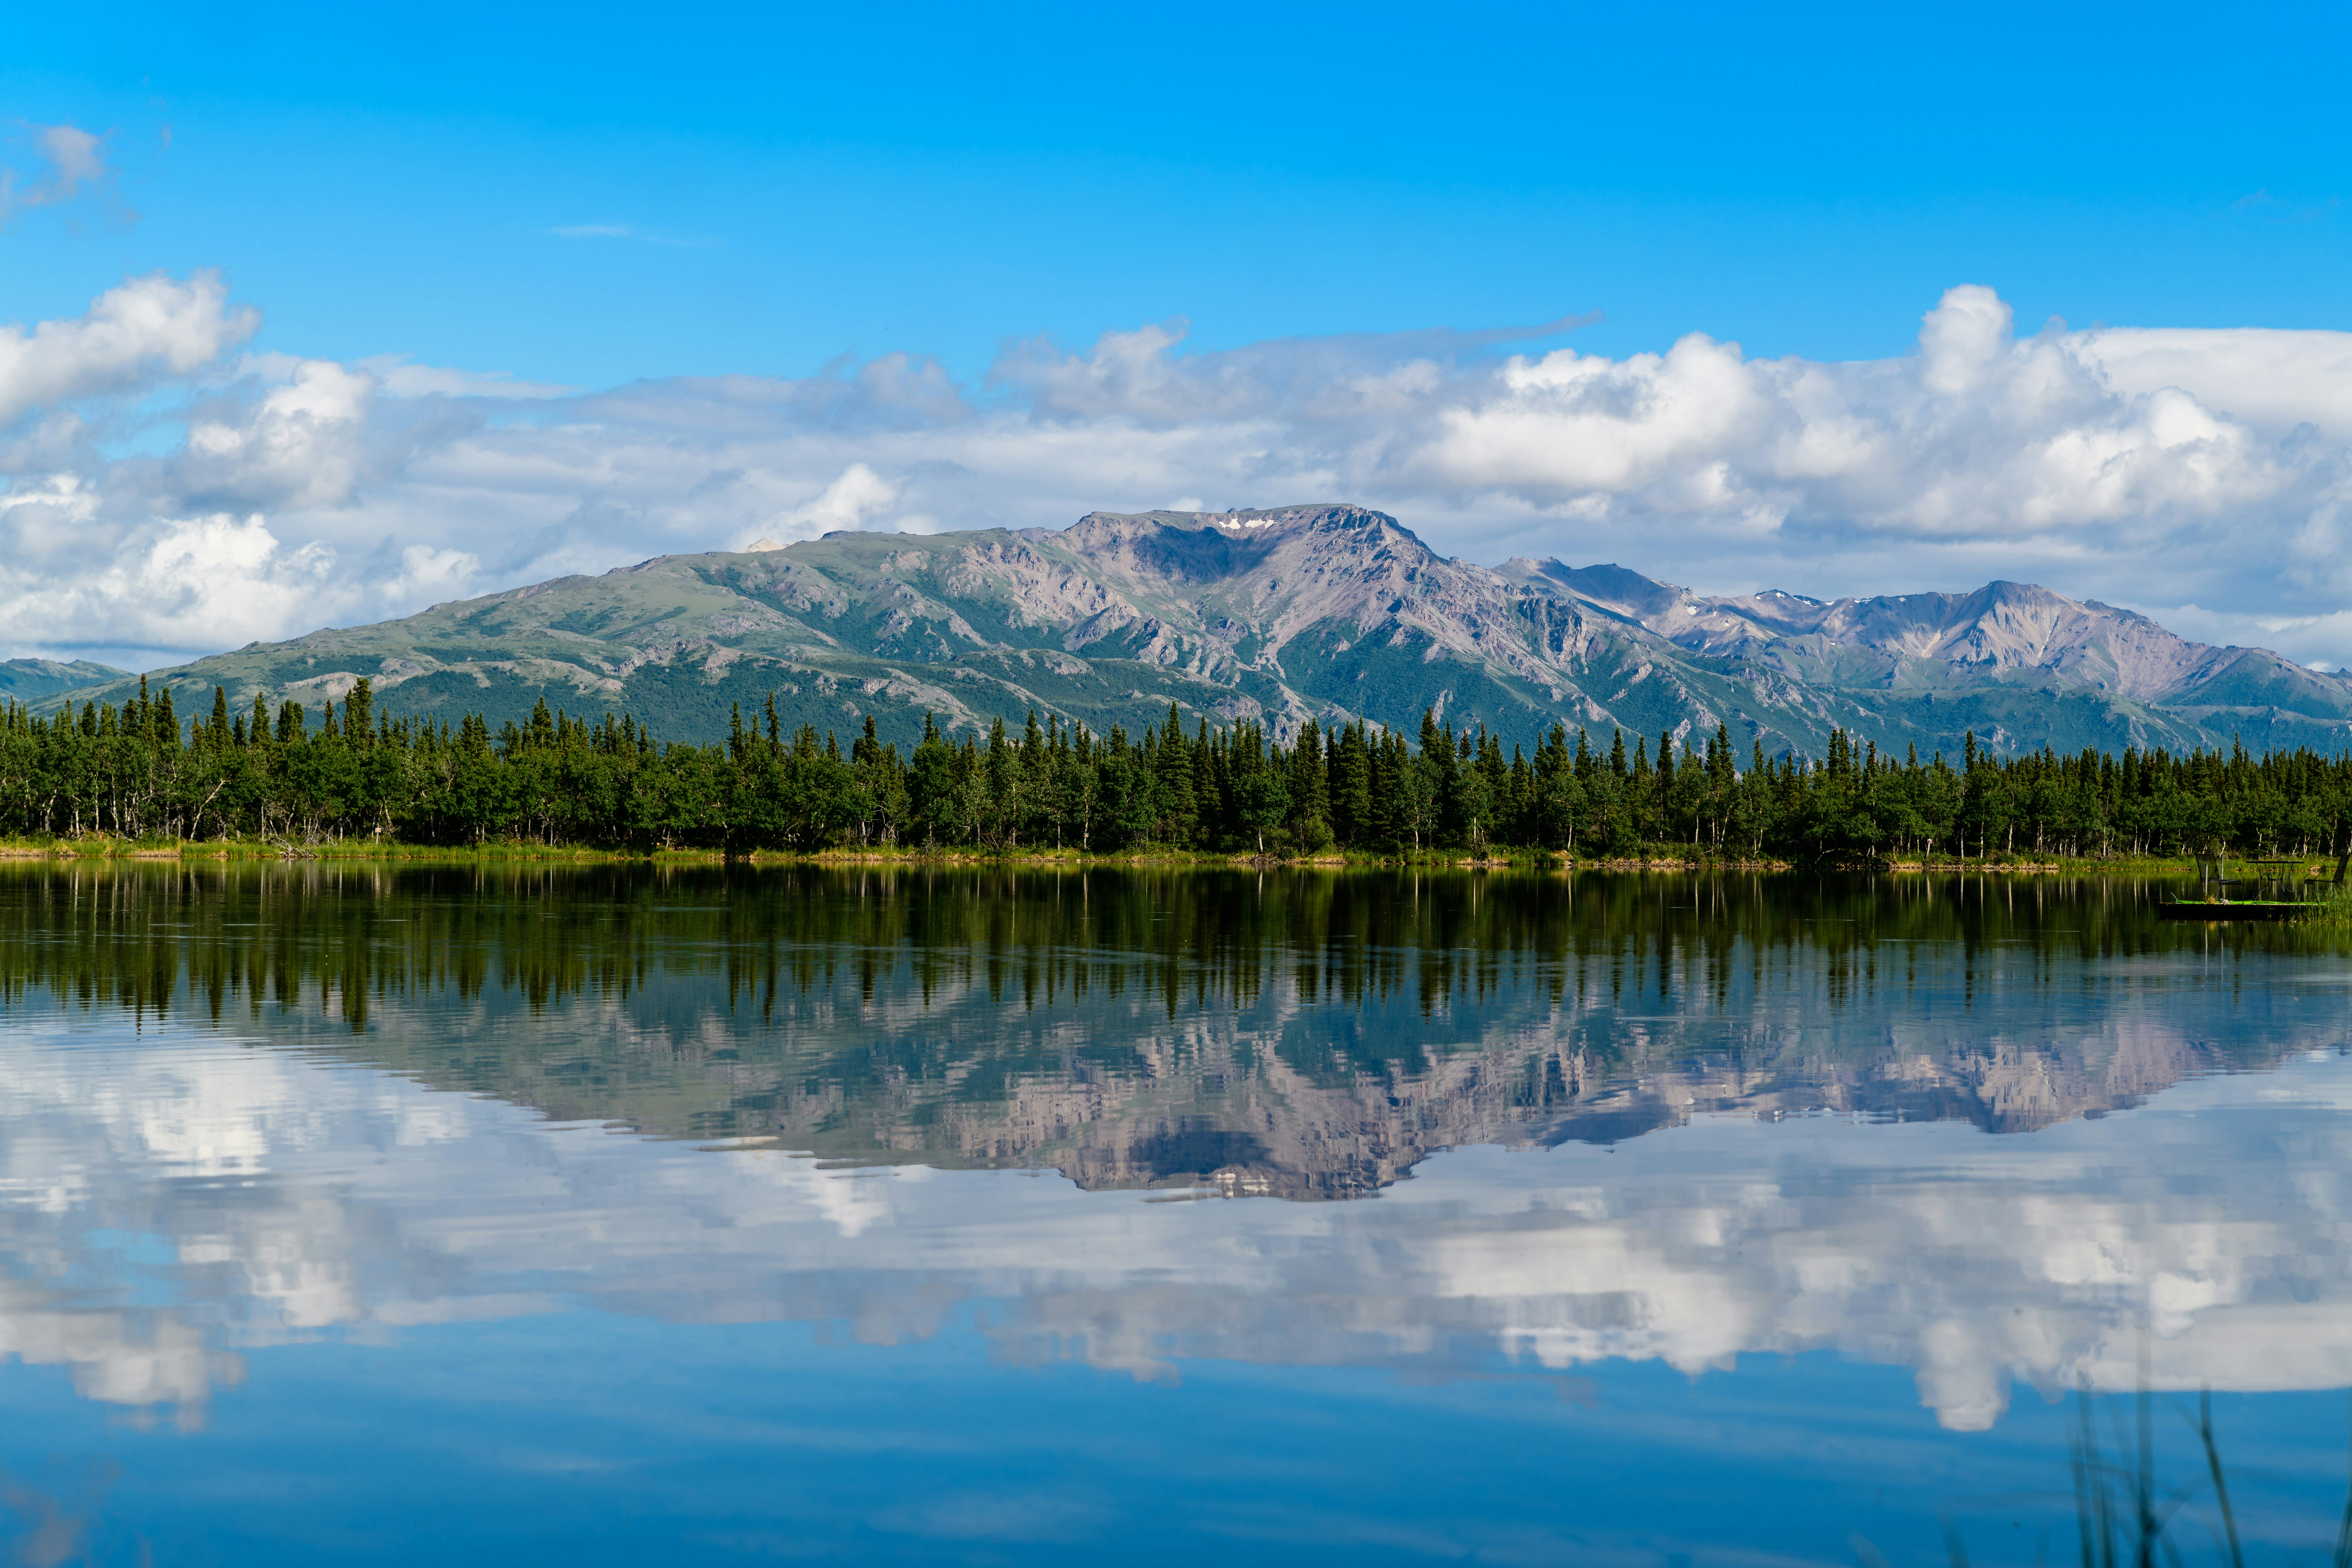 Reflections are always special, especially when there are Alaskan mountains around.